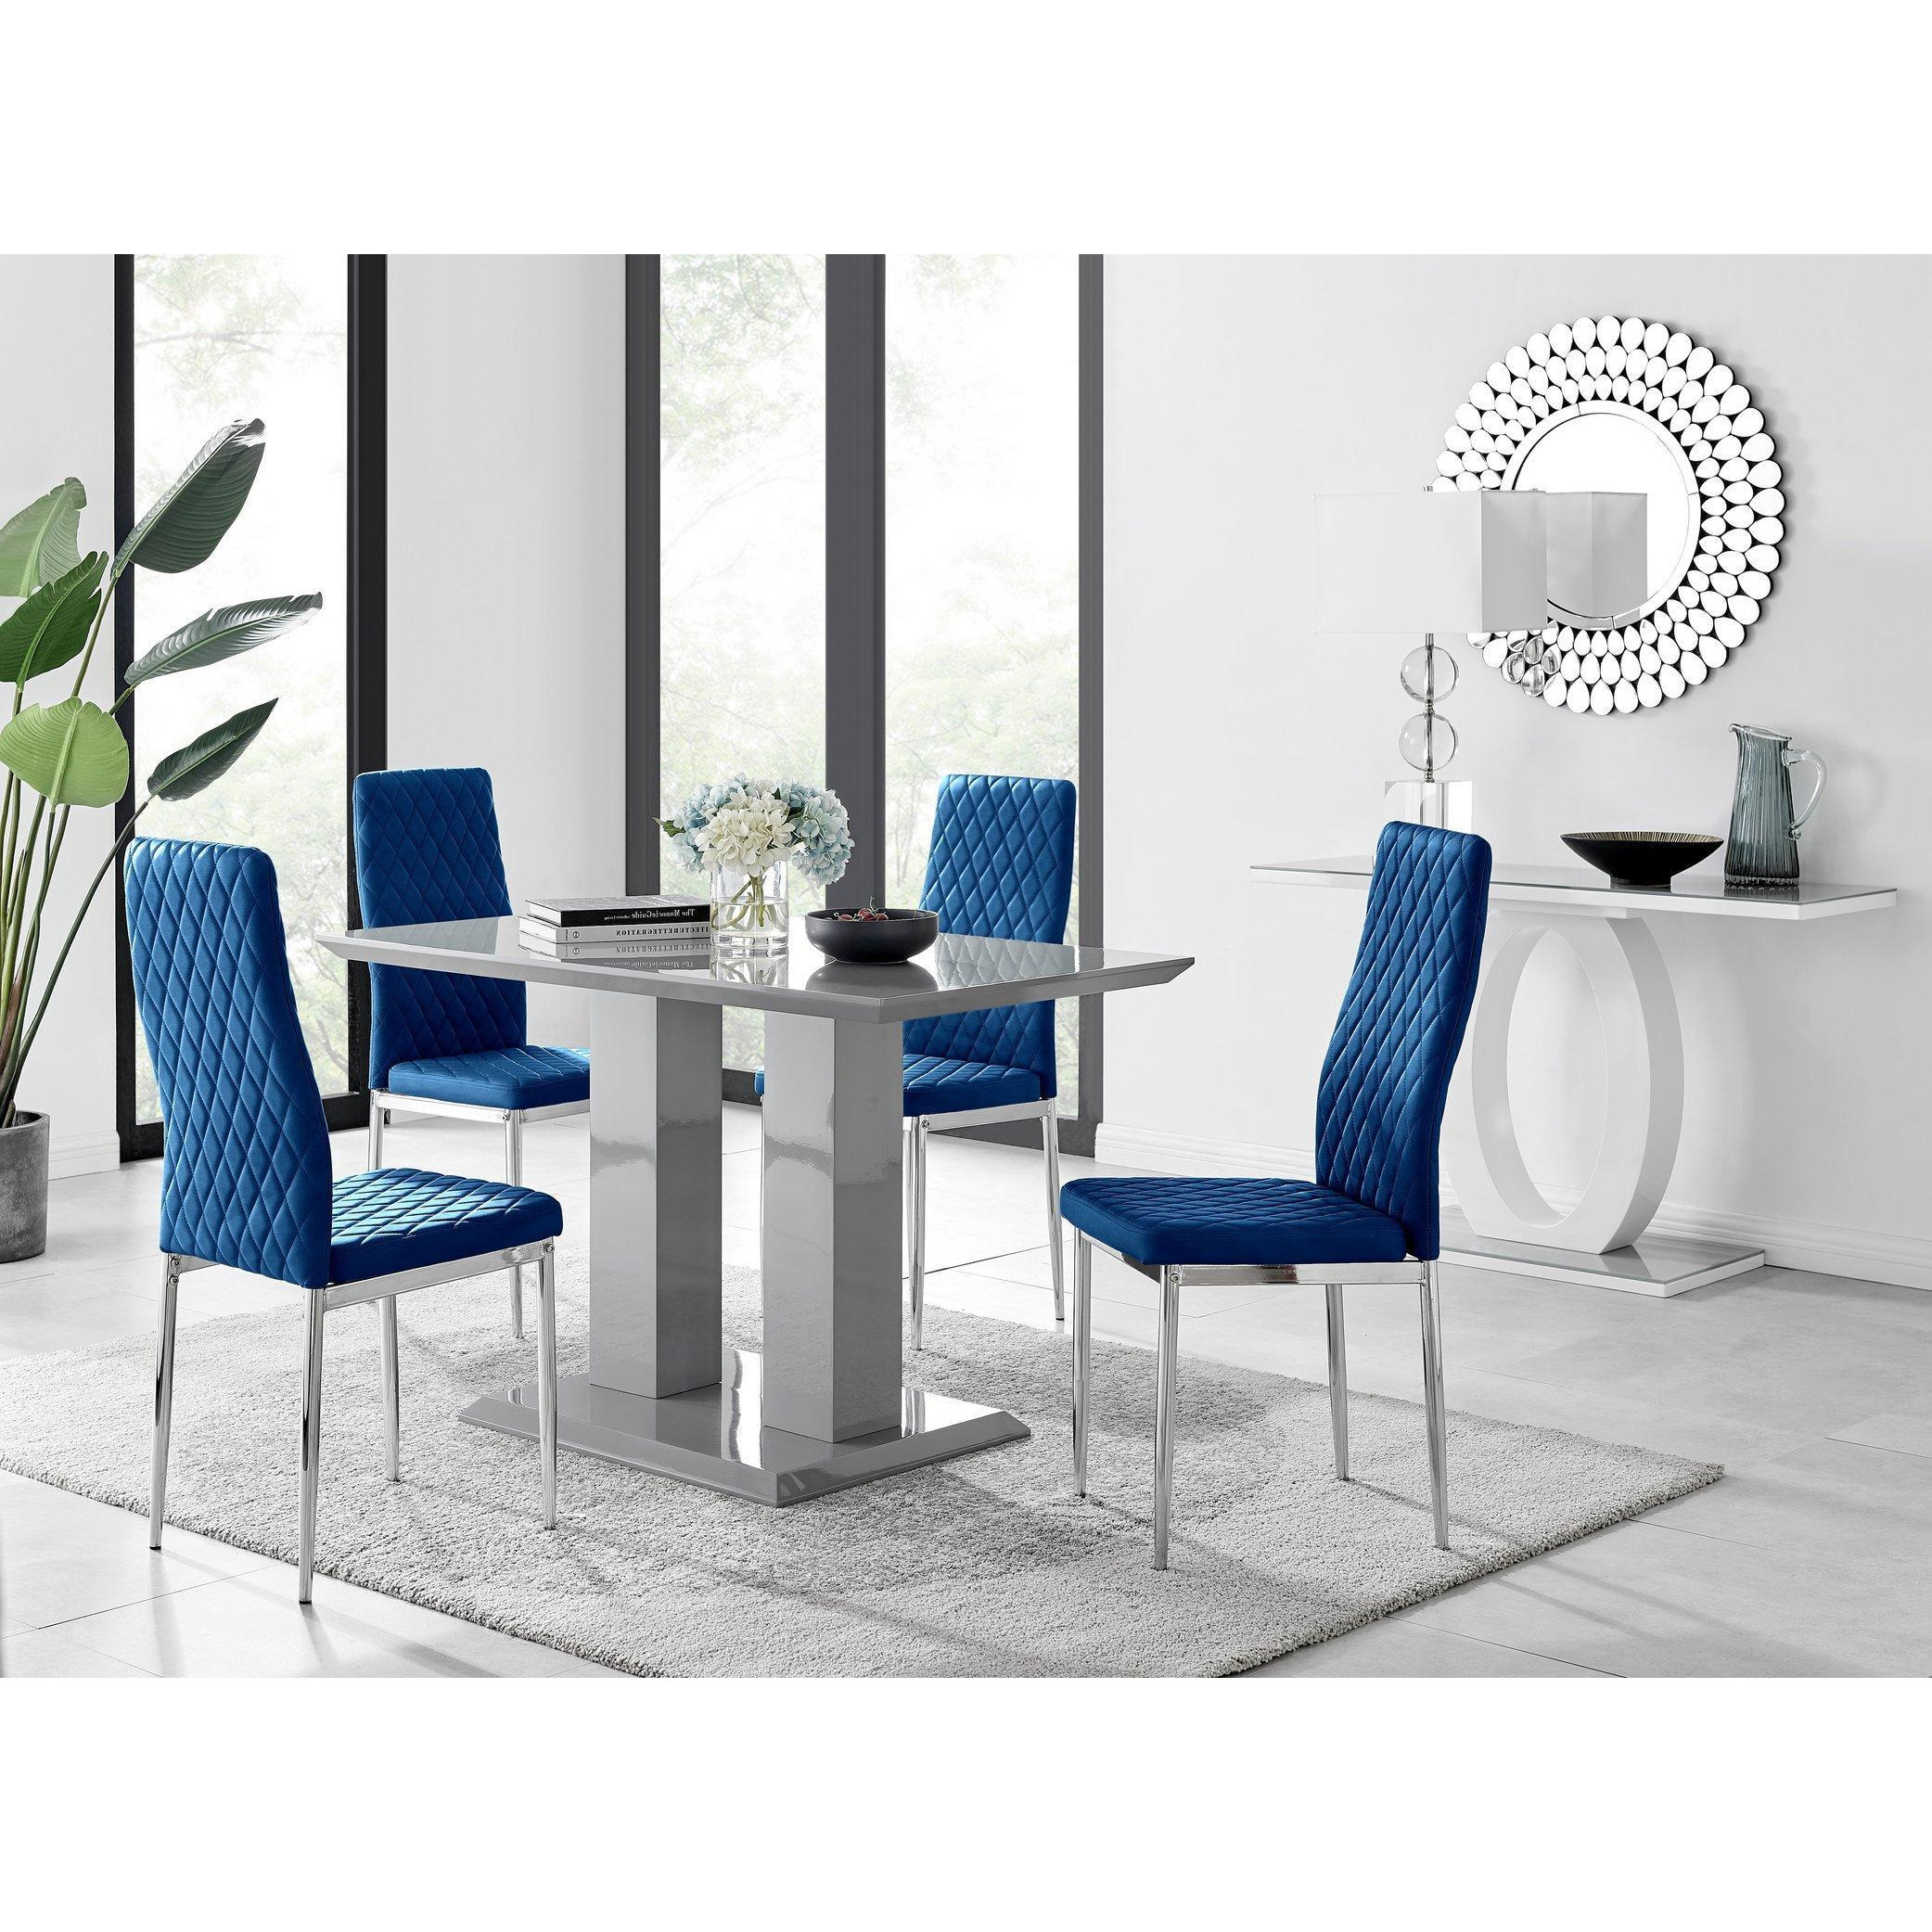 Imperia Grey High Gloss 4 Seater Dining Table with Structural 2 Plinth Column Legs 4 Soft Velvet Silver Leg Milan Chairs - image 1